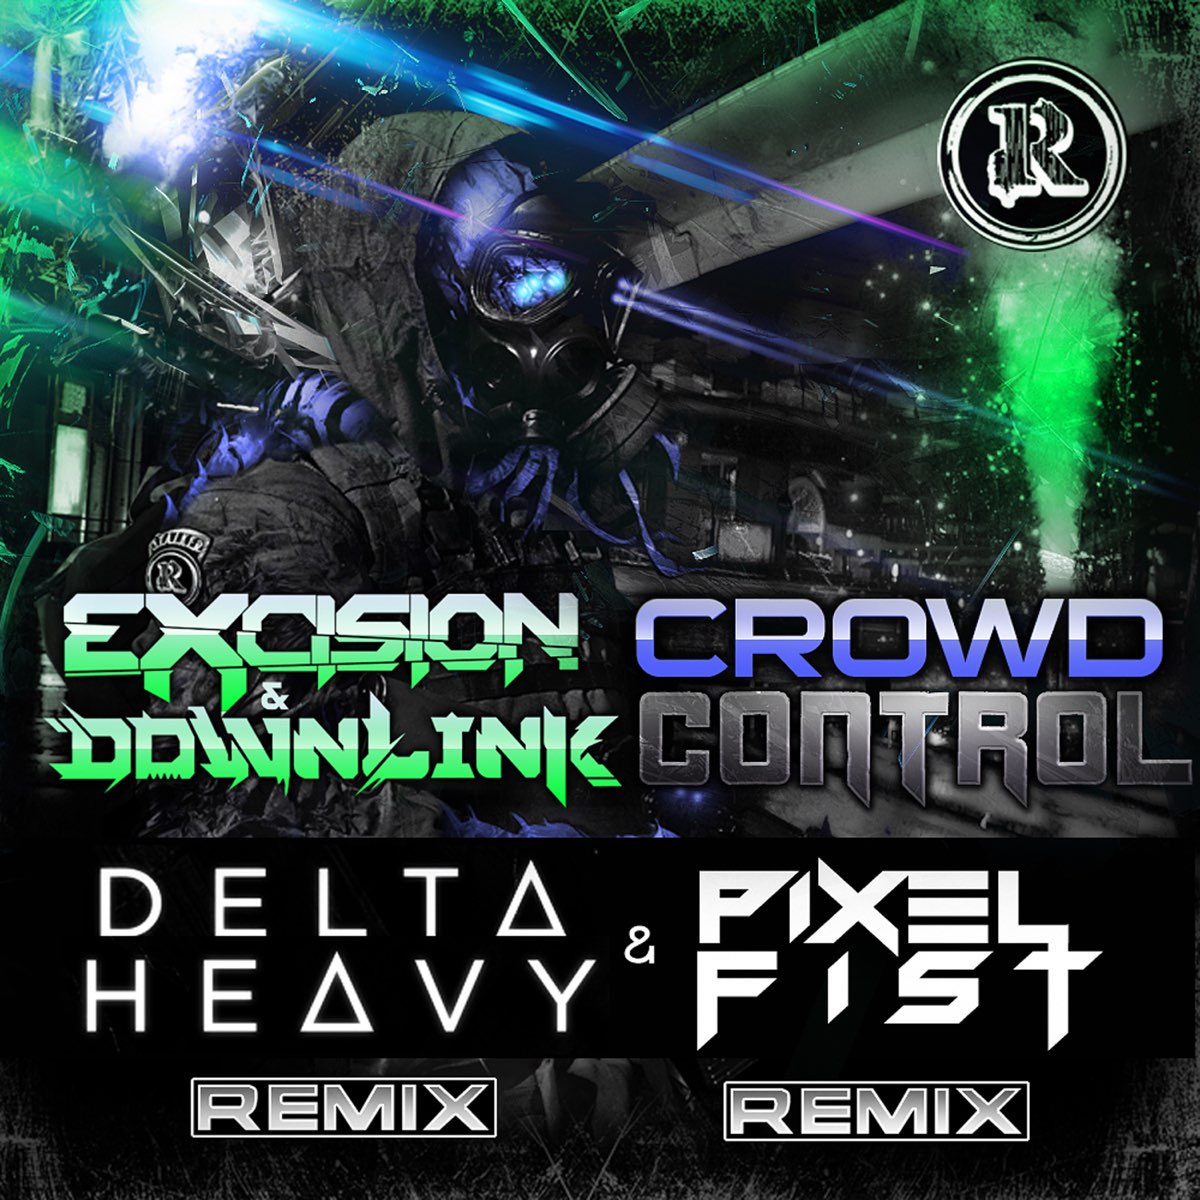 Excision and Downlink. Crowd Control. Downlink обложки. Crowd Control Band#.